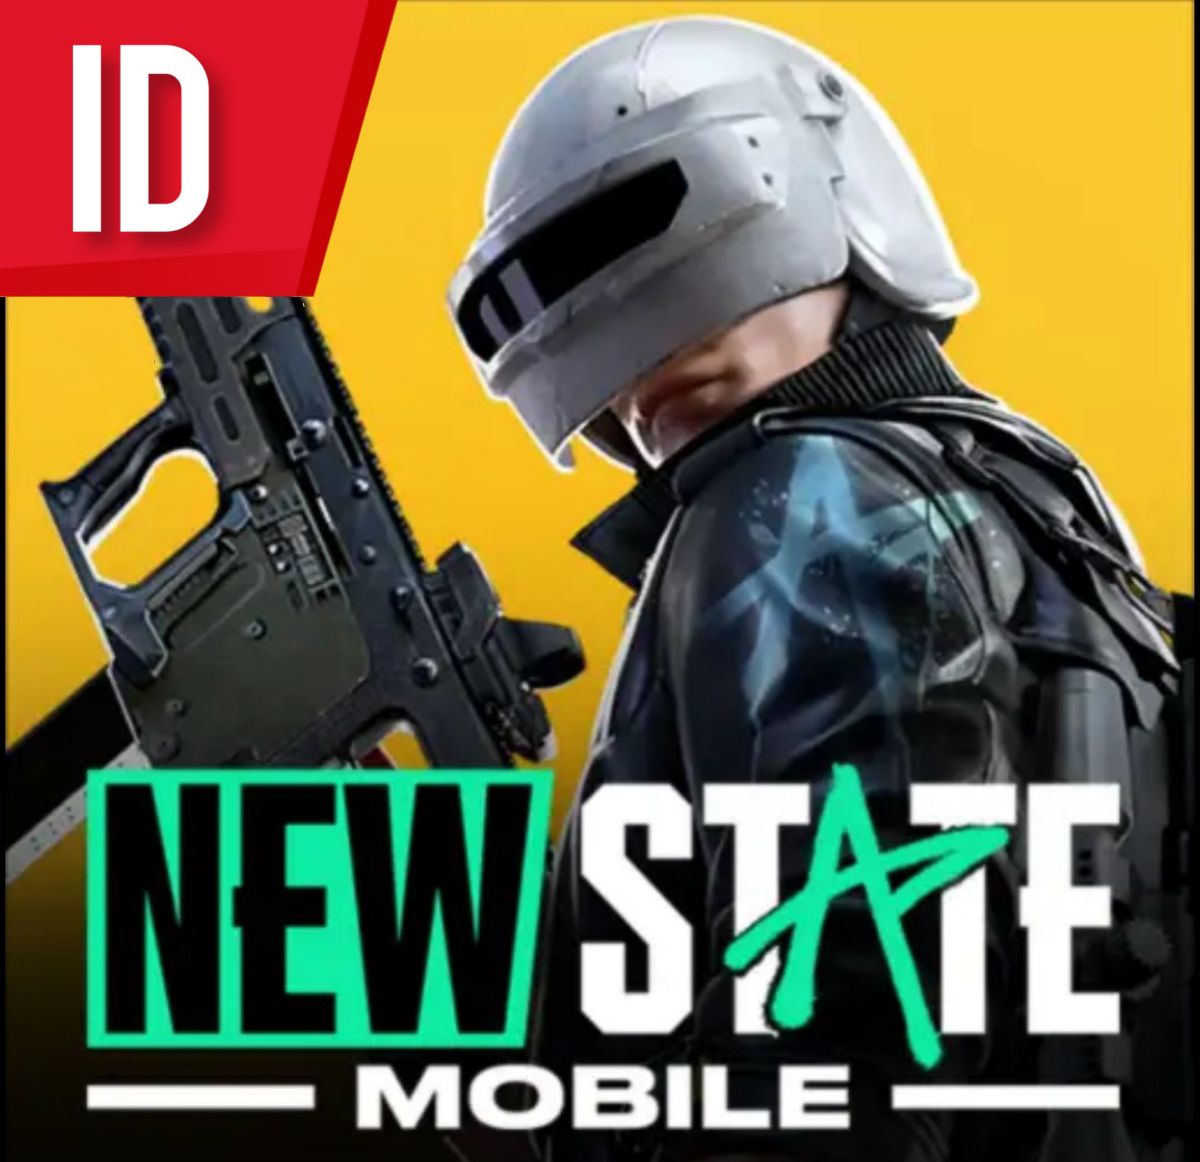  New State Mobile